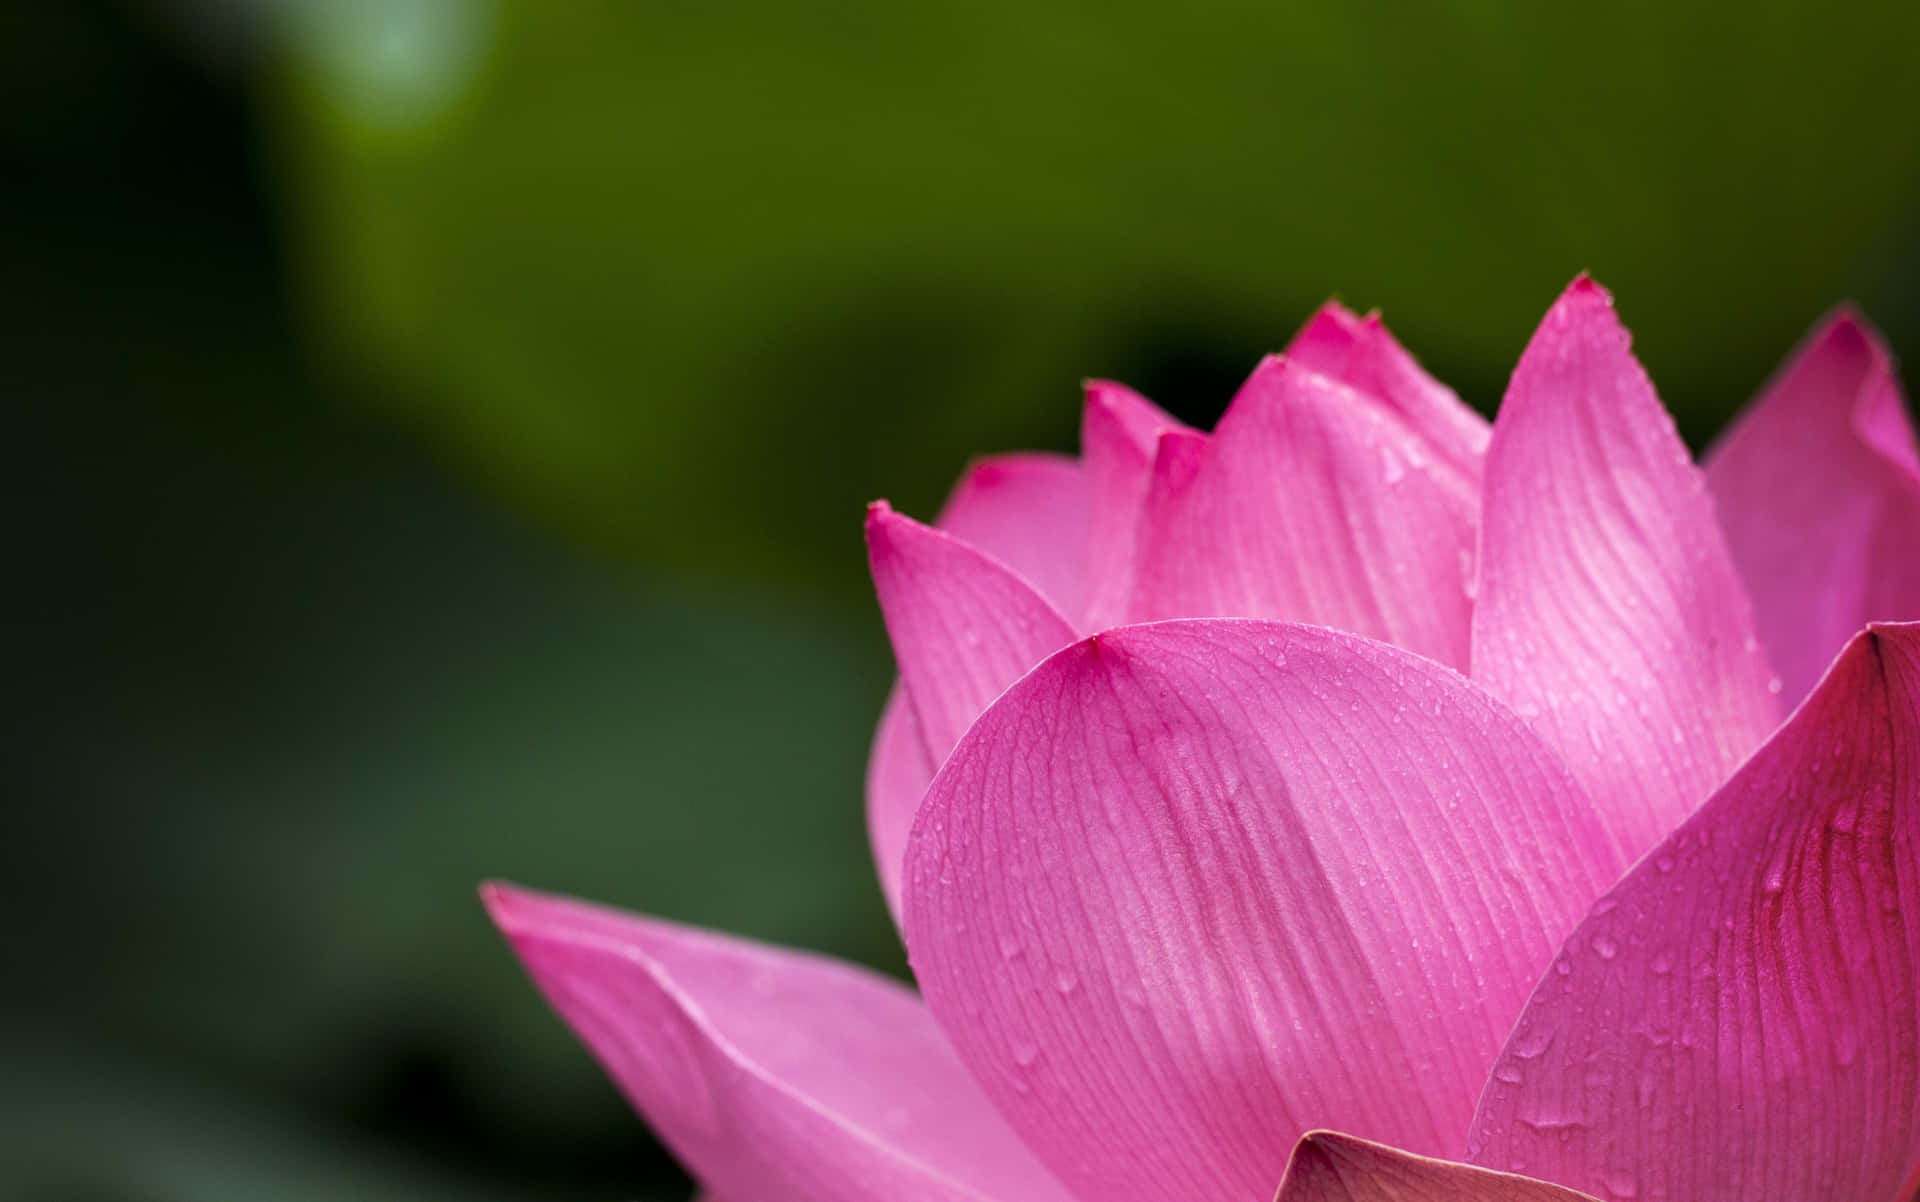 A Pink Lotus Flower With Water Drops On It